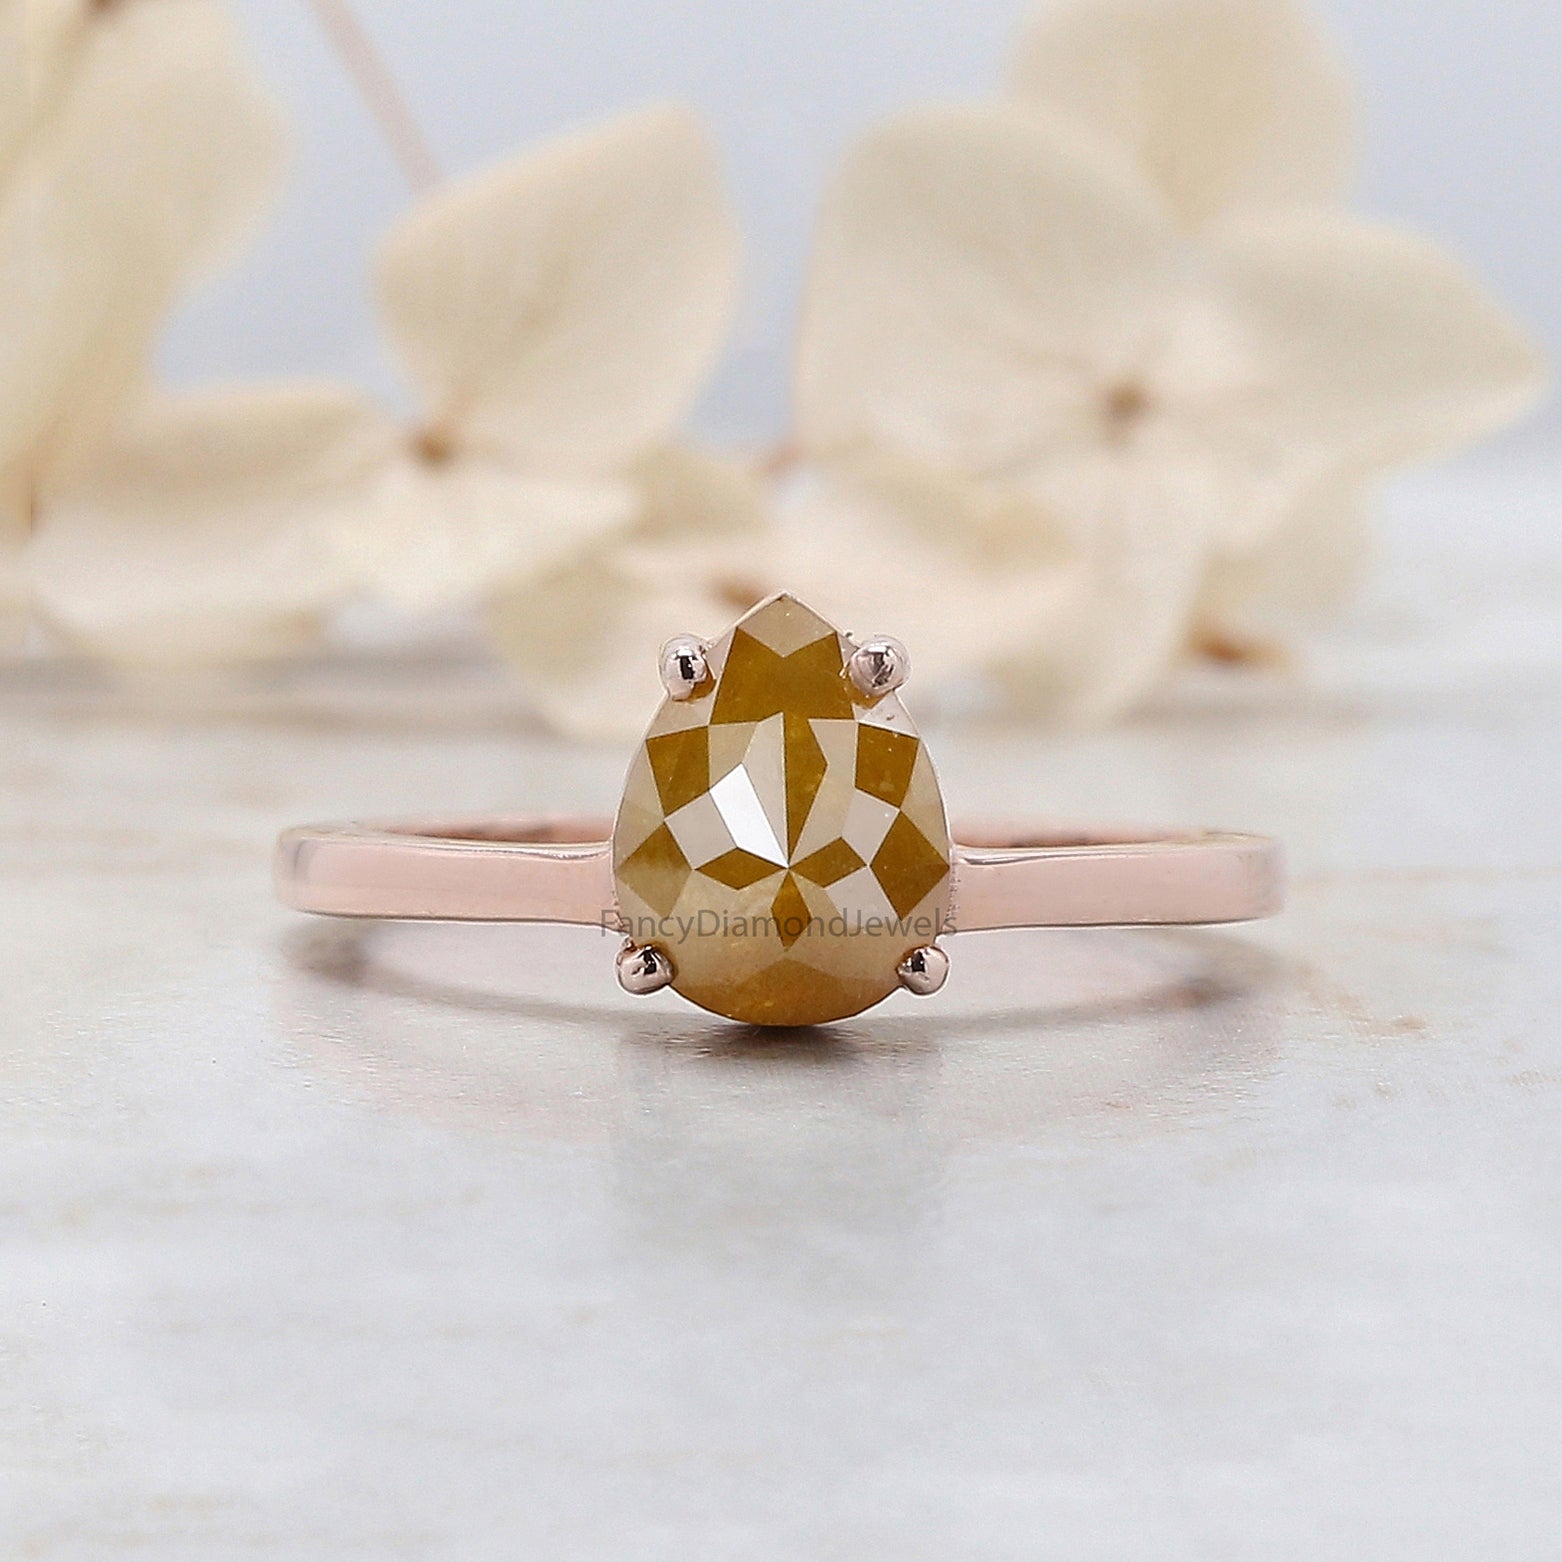 Pear Cut Yellow Color Diamond Ring 1.92 Ct 8.50 MM Pear Shape Diamond Ring 14K Solid Rose Gold Silver Engagement Ring Gift For Her QN9131